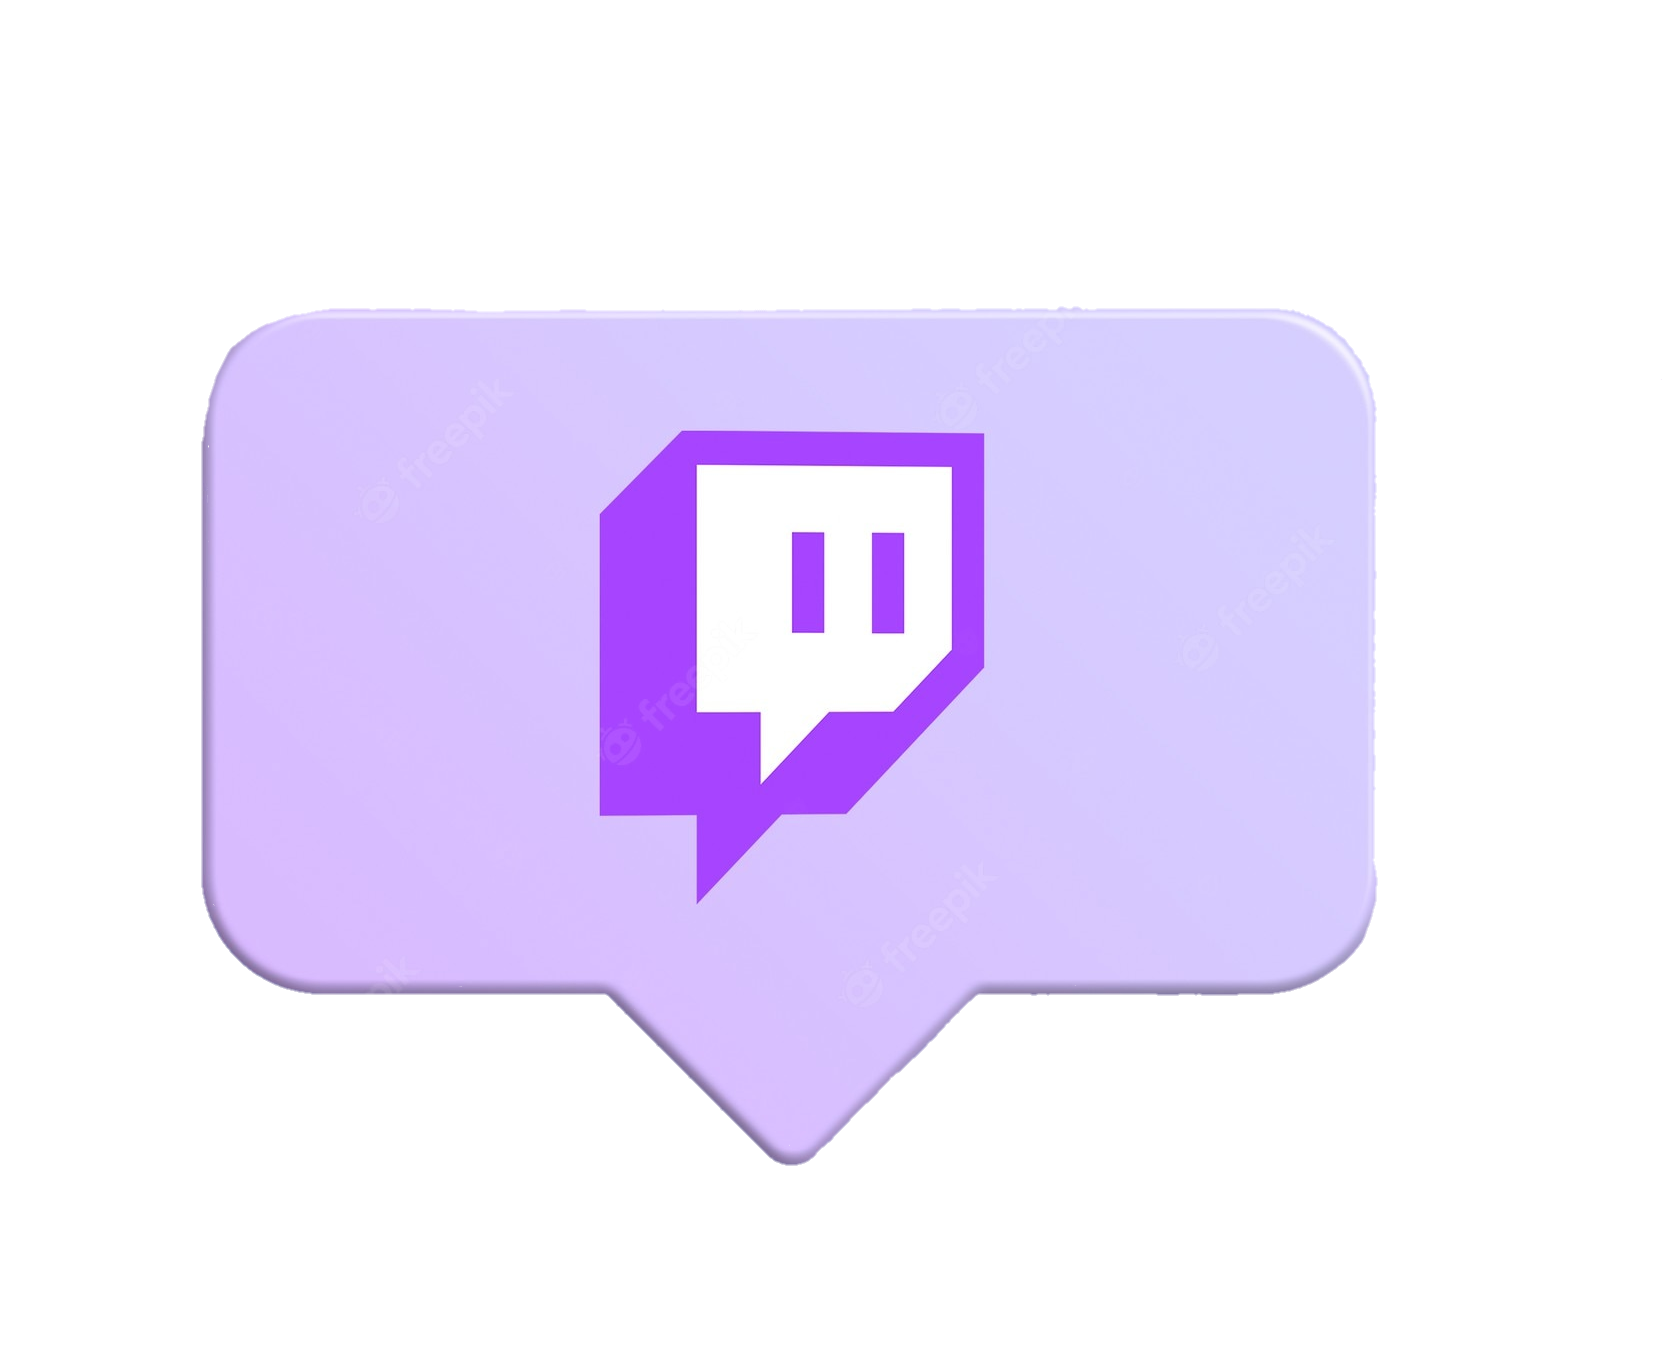 twitch-logo-png-from-pngfre-34